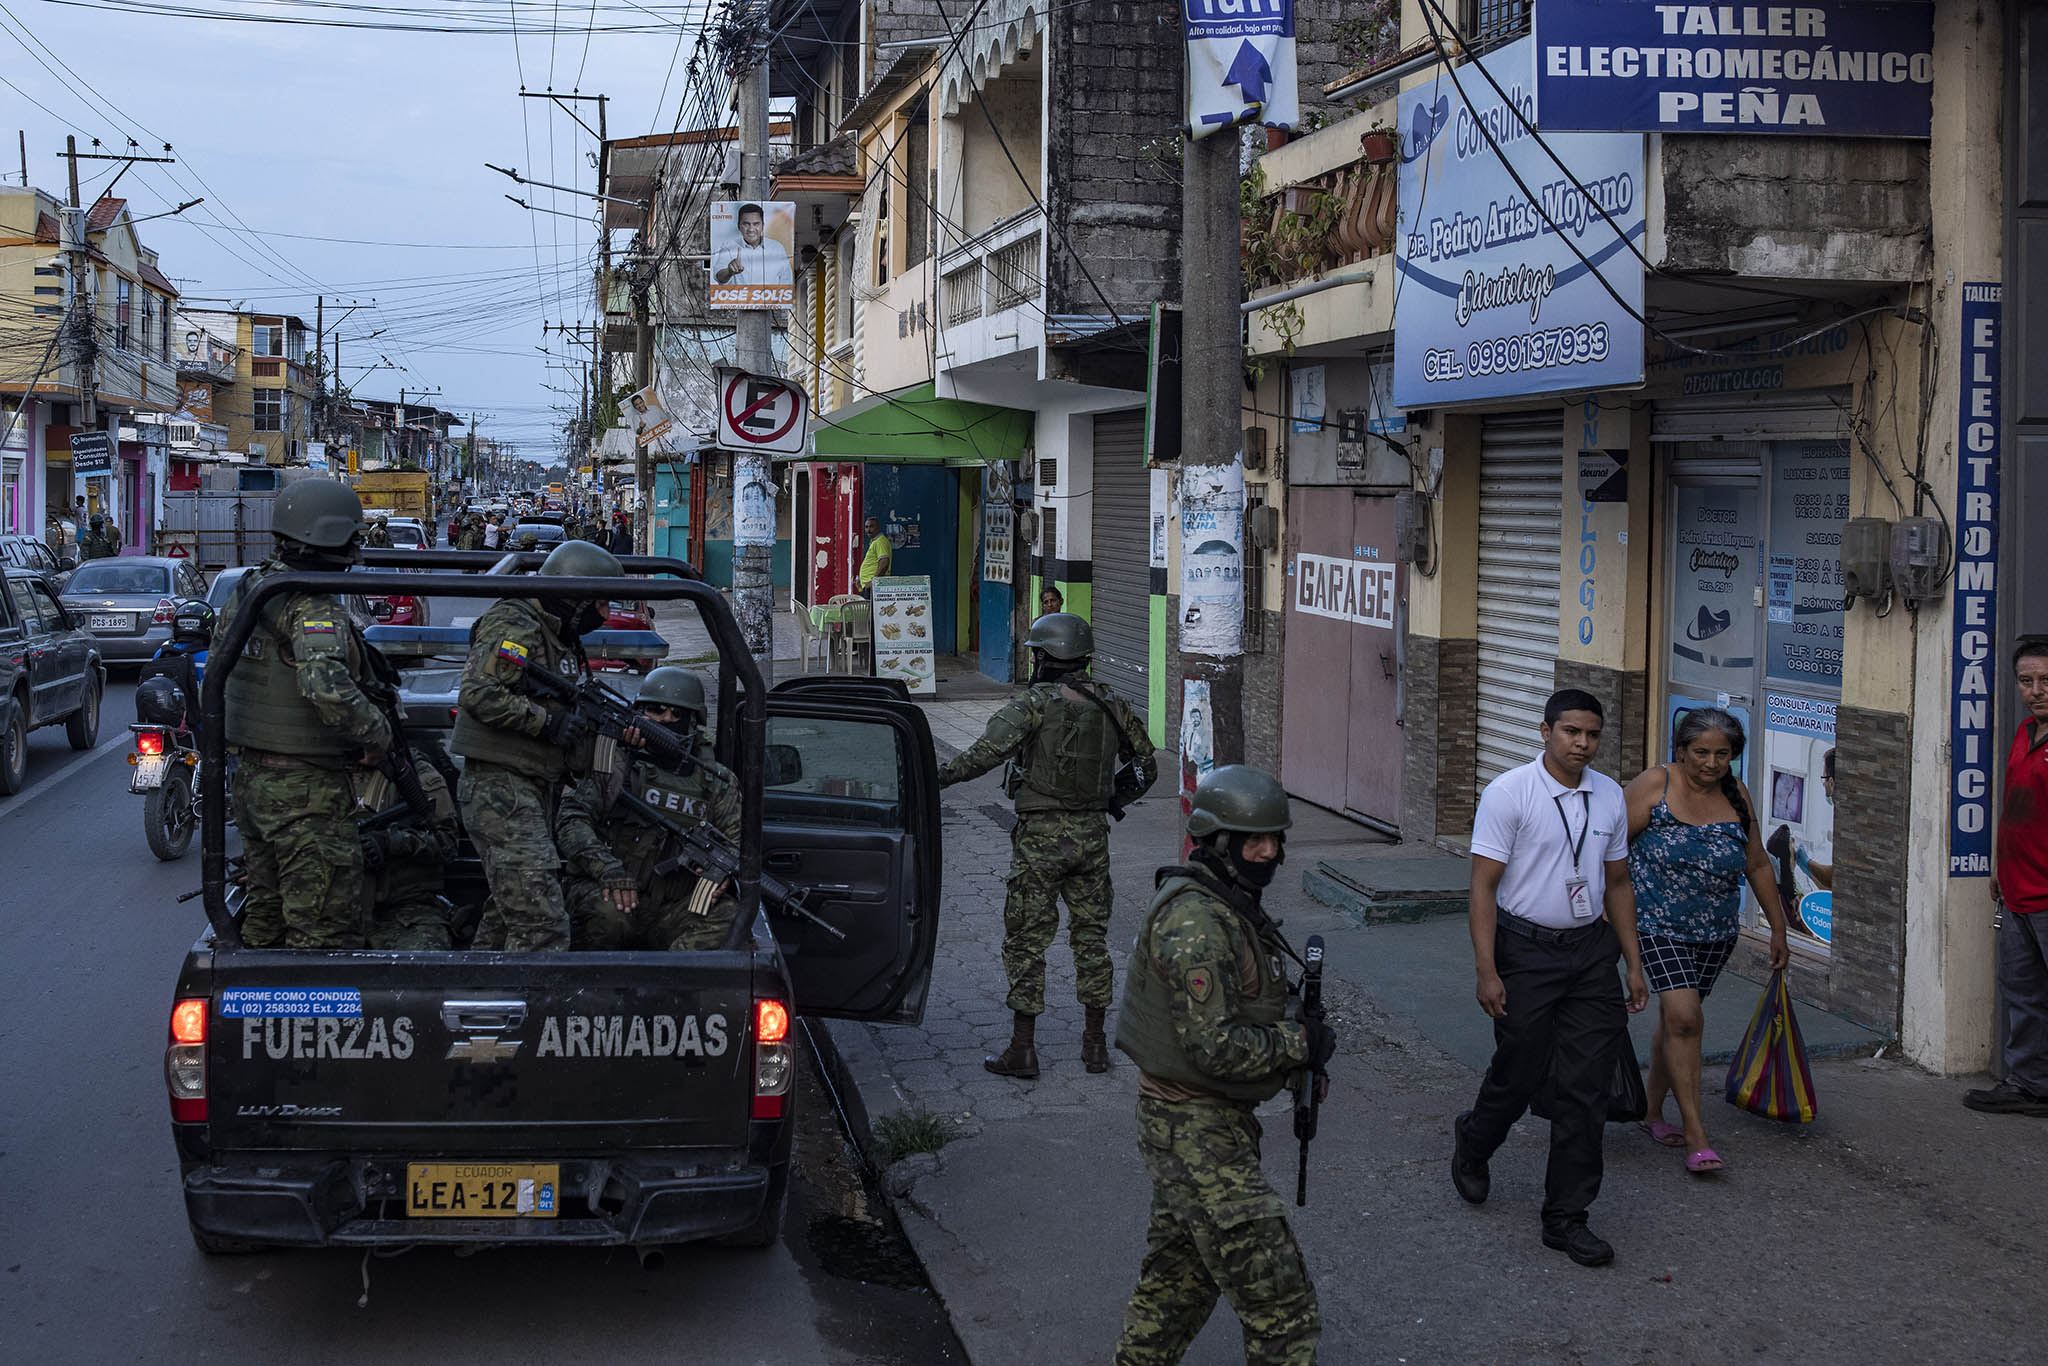 Soldiers patrolling Durán, a suburb of Guayaquil, Ecuador, which is dominated by groups linked to drug trafficking, on May 31, 2023. (Victor Moriyama/The New York Times)